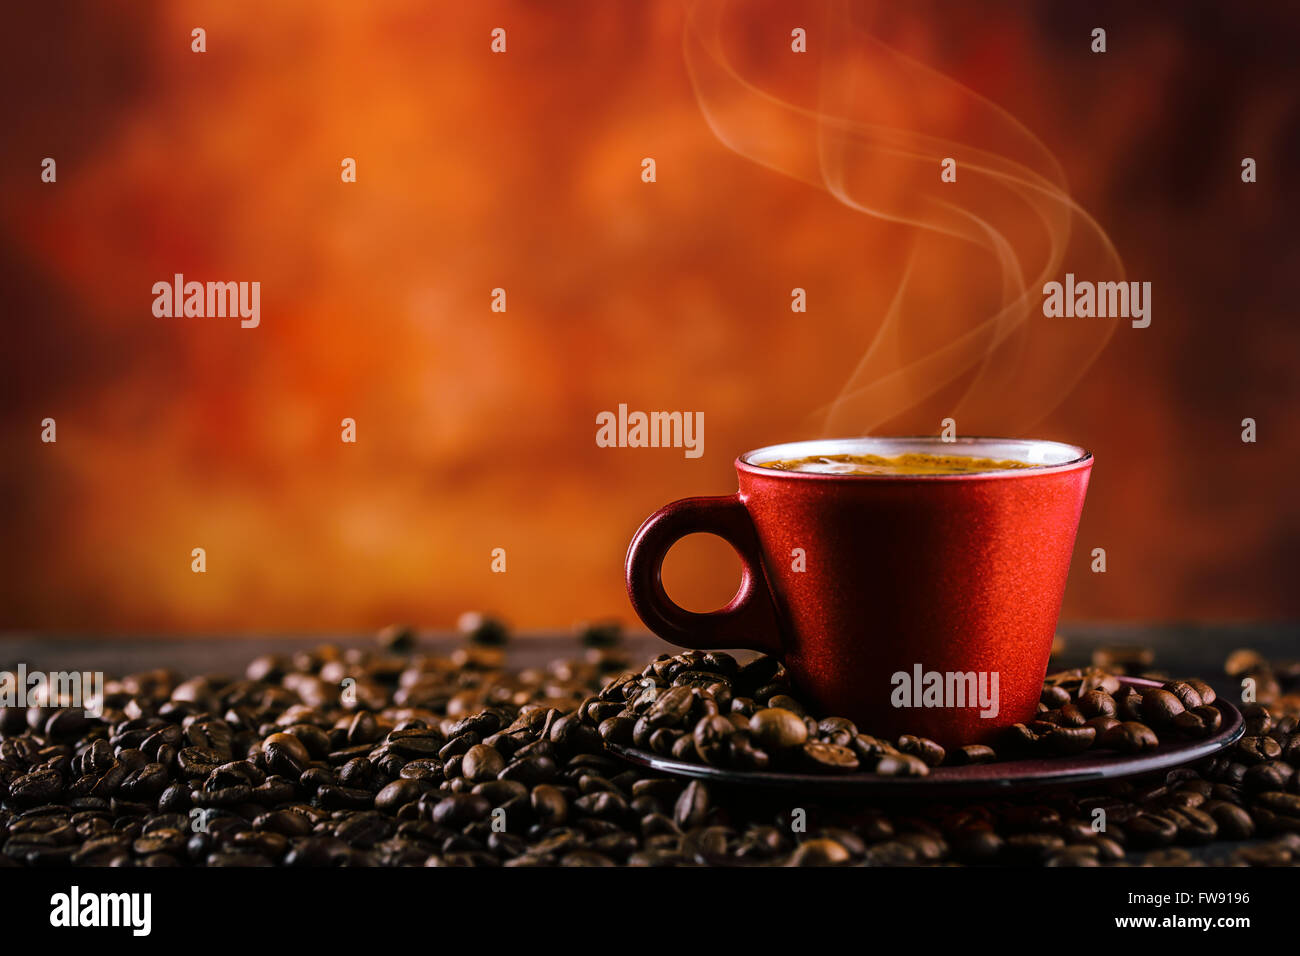 Coffee. Cup of black coffee and spilled coffee beans. Coffee break. Stock Photo